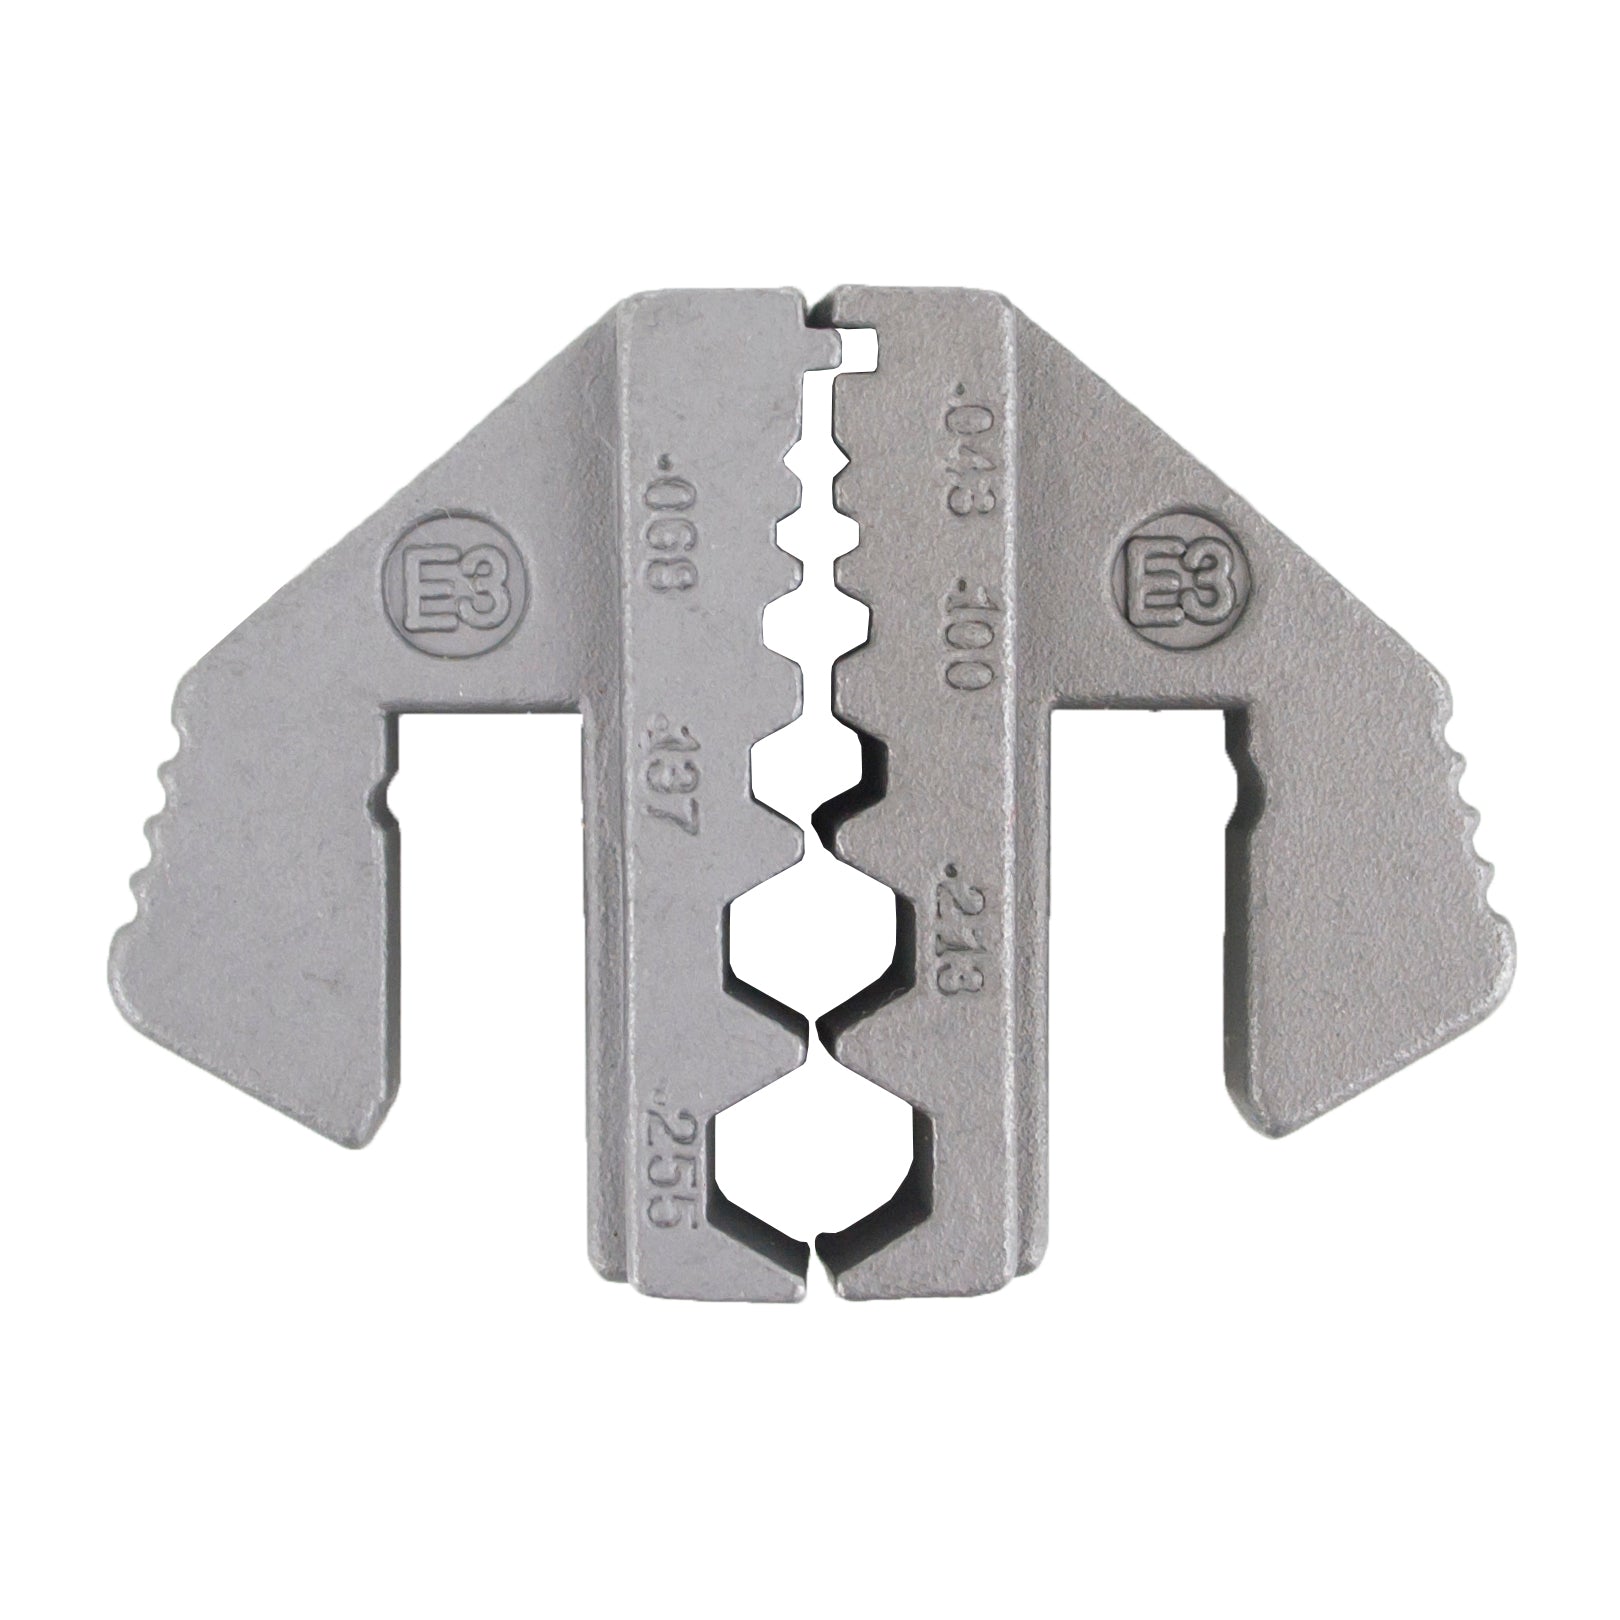 Crimping Tool Die - E3 Die for RG Type Coaxial Cable Connector .043/.068/.100/.137/.213/.255"